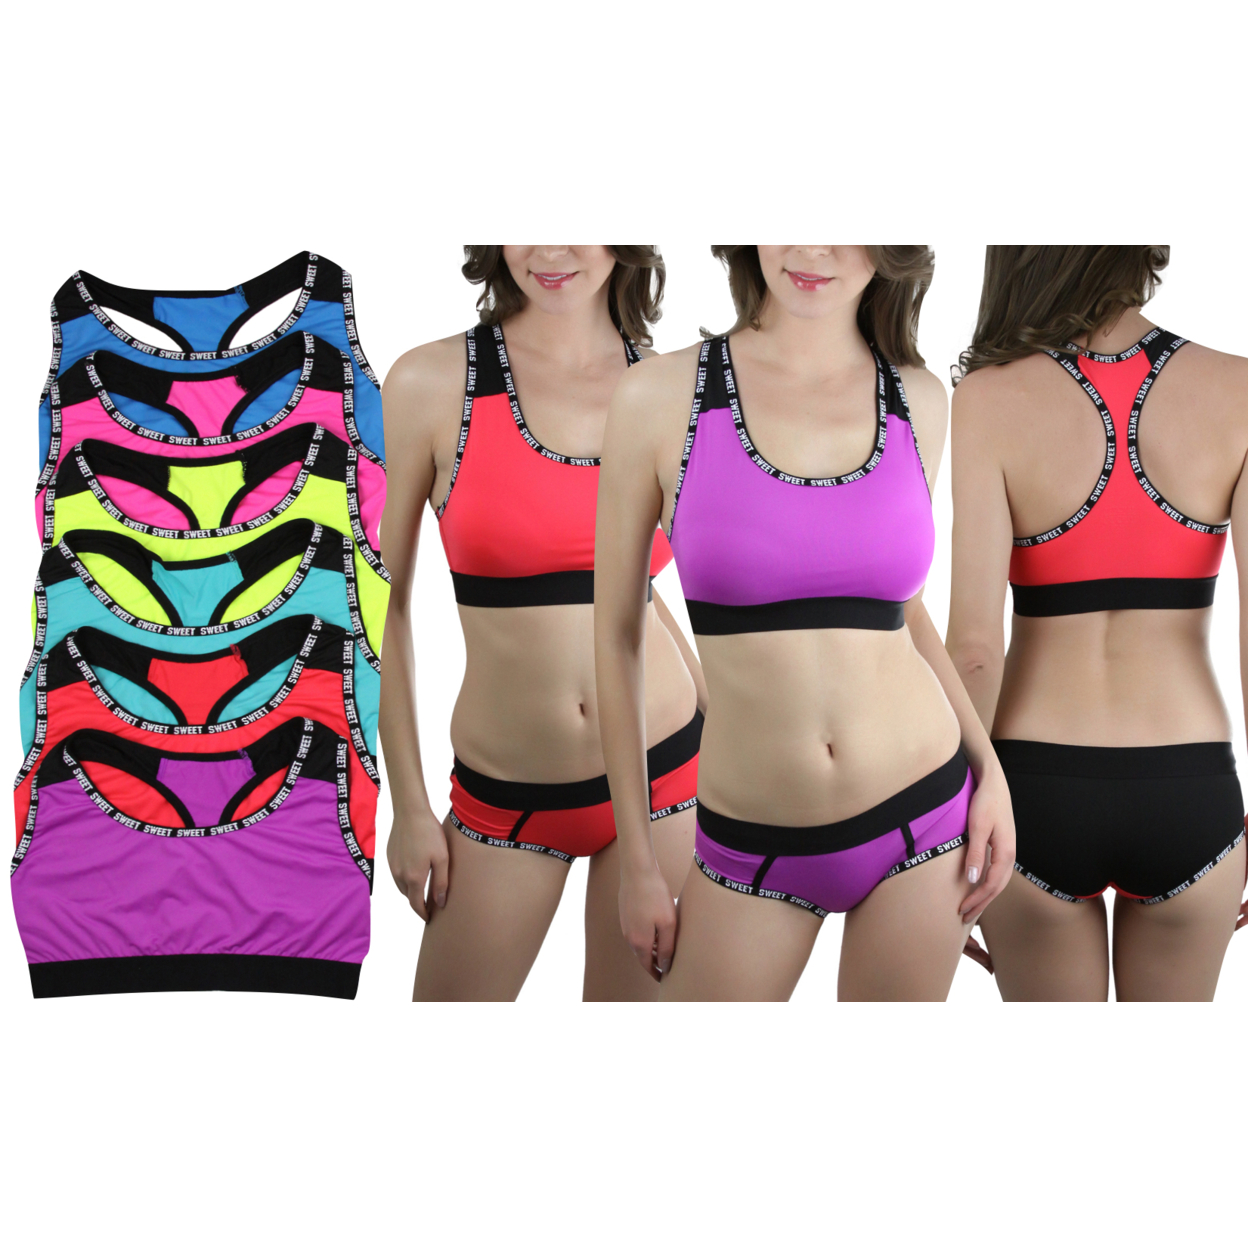 5-Pack Of Women's Sports Bras Or 6-Pack Of Athletic Briefs With Sweet Outer Trim - S/M, Bras